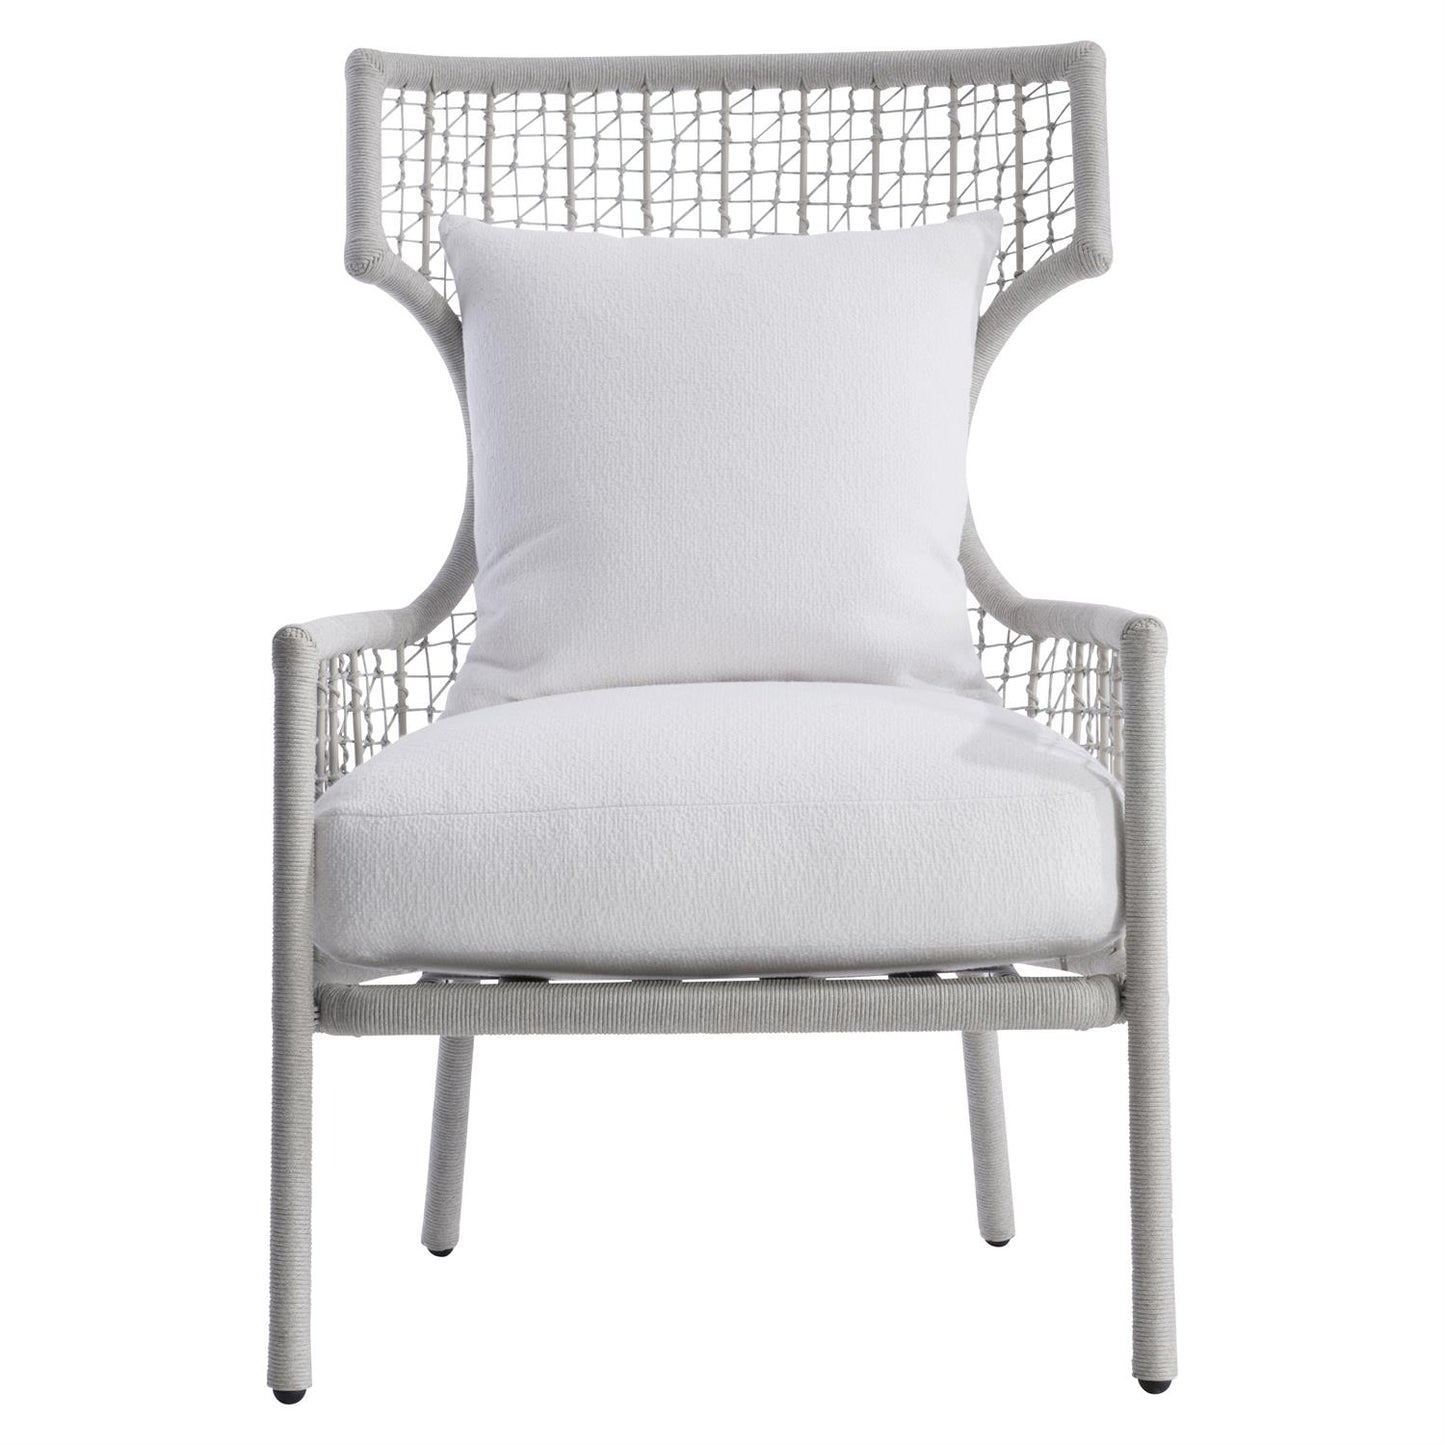 Paloma Outdoor Chair